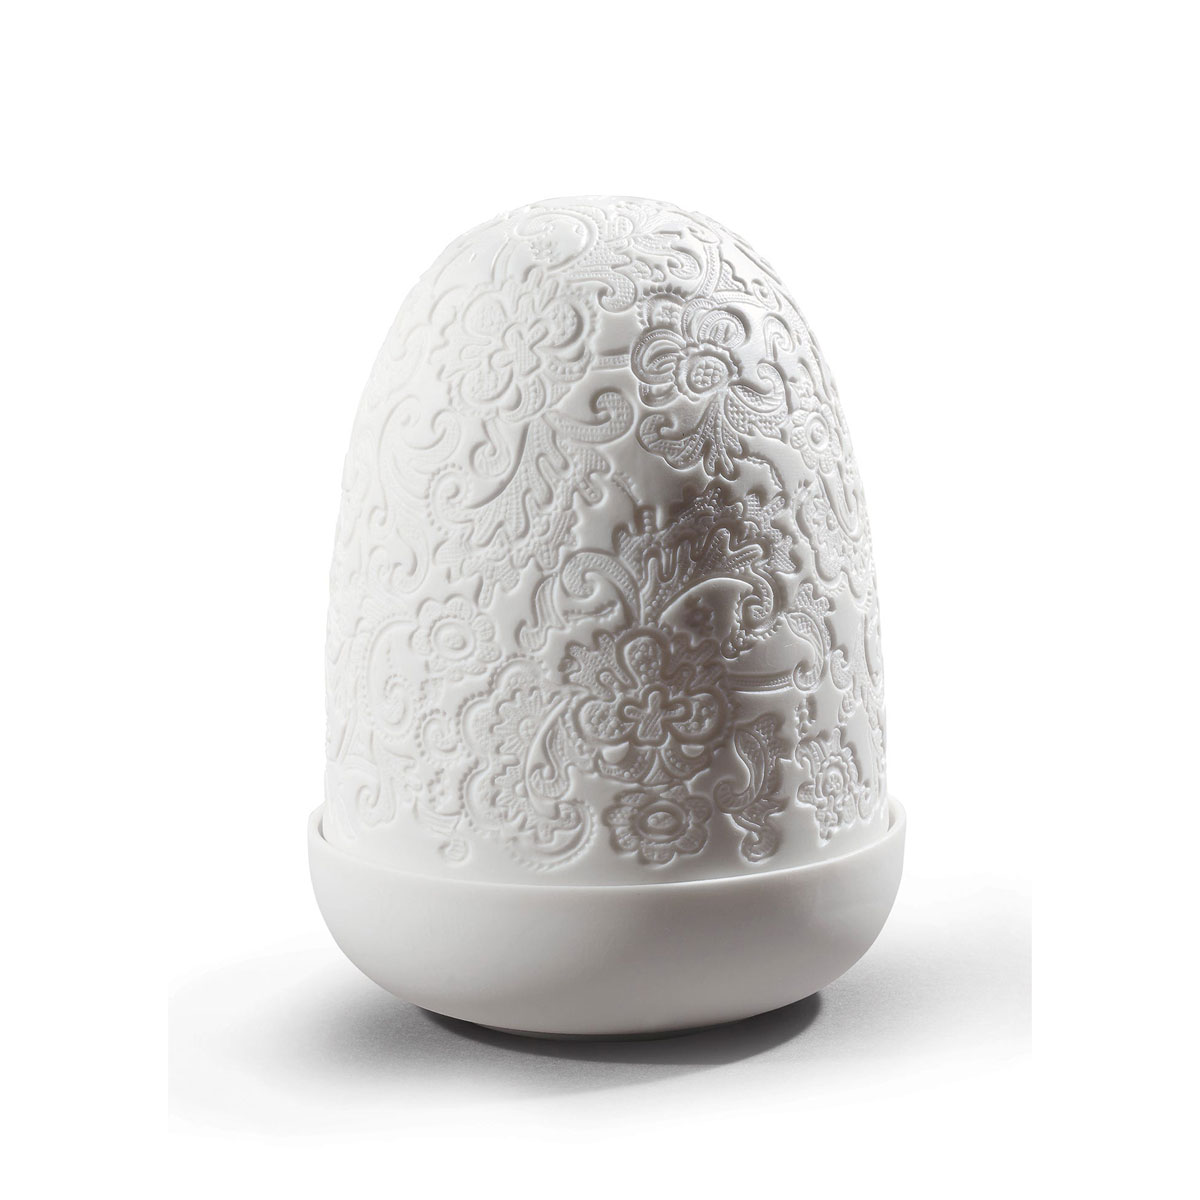 Lladro Light And Fragrance, Lace Dome Table Lamp